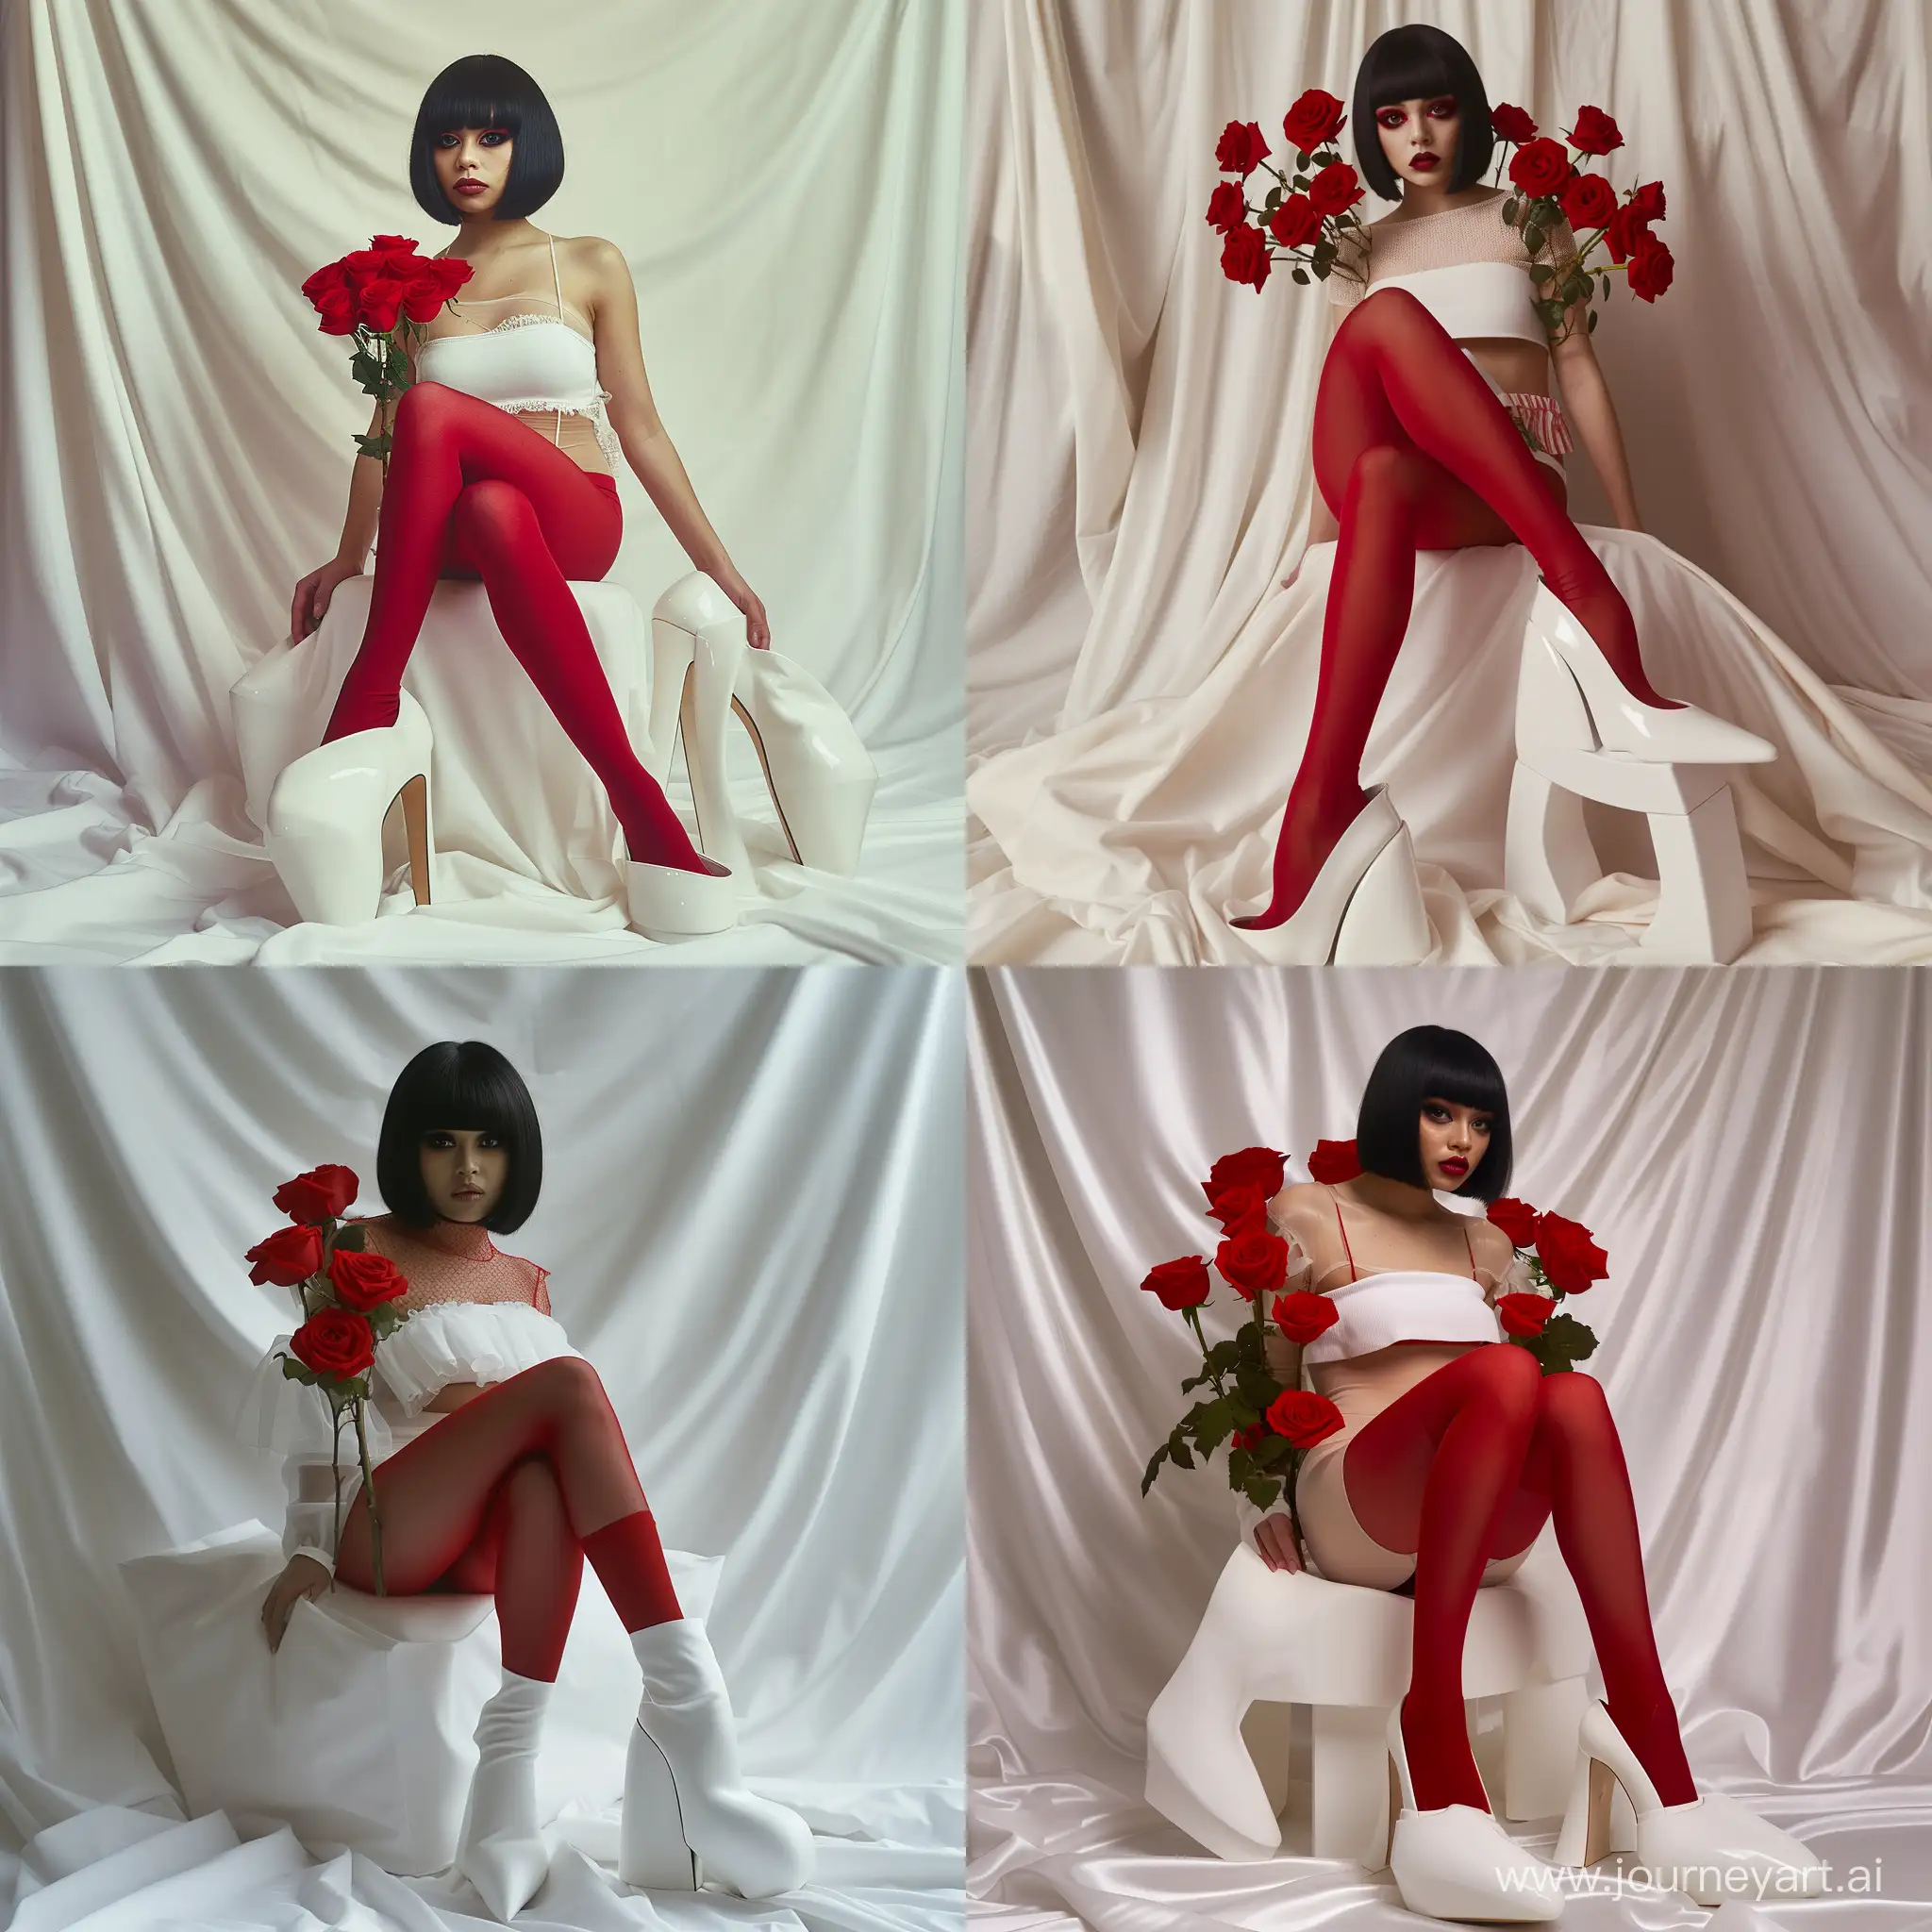 Graceful-Model-in-Red-Tights-and-White-Crop-Top-with-Roses